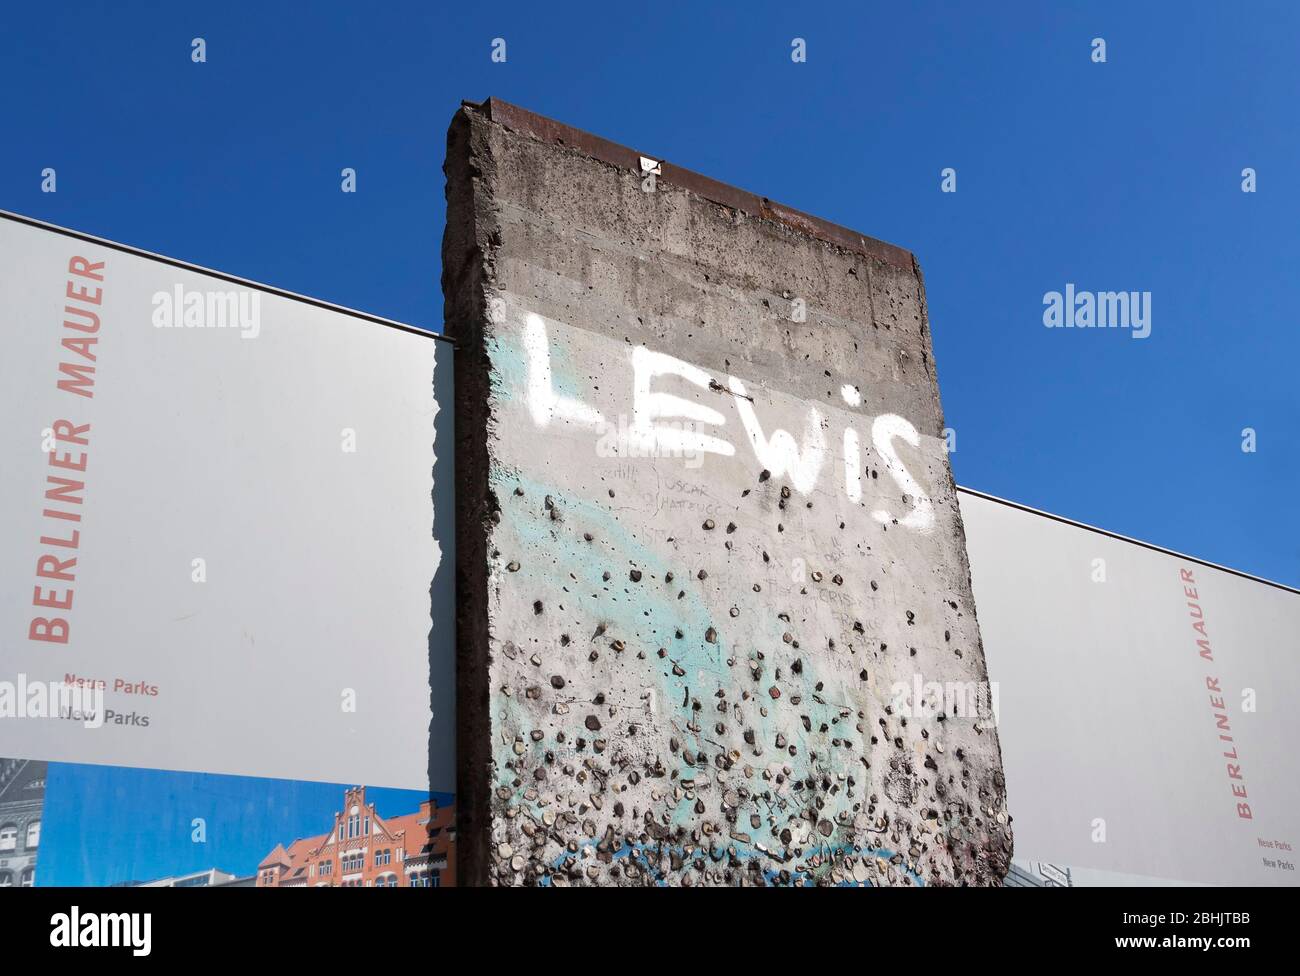 Remains of the Berlin Wall at Potsdamer Platz in Berlin Stock Photo